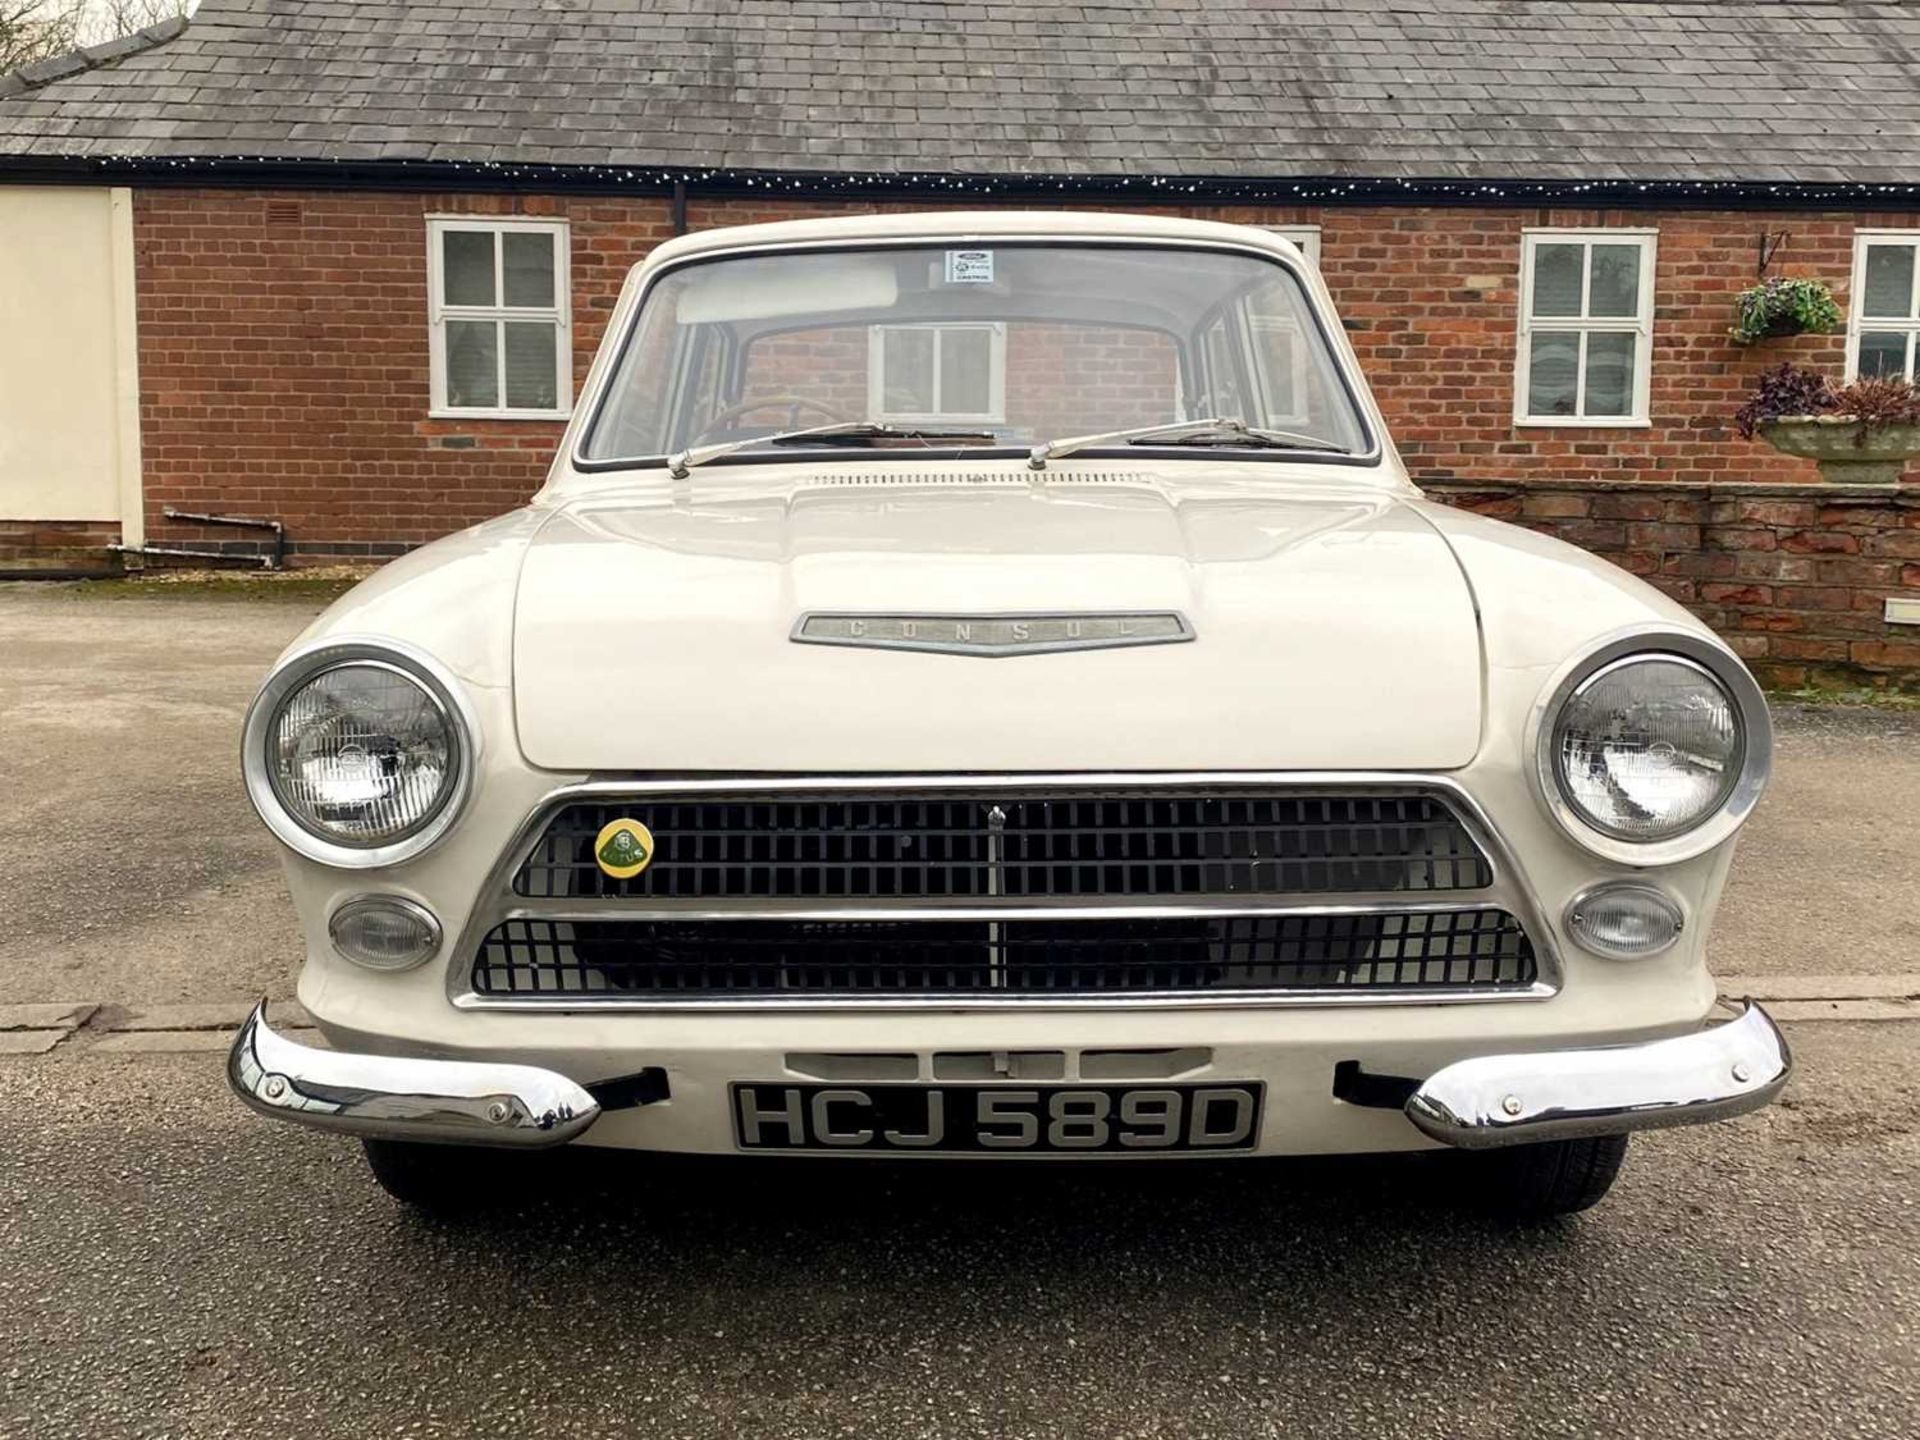 1963 Ford Lotus Cortina Pre-Aeroflow model, fitted with A-frame rear suspension - Image 12 of 58